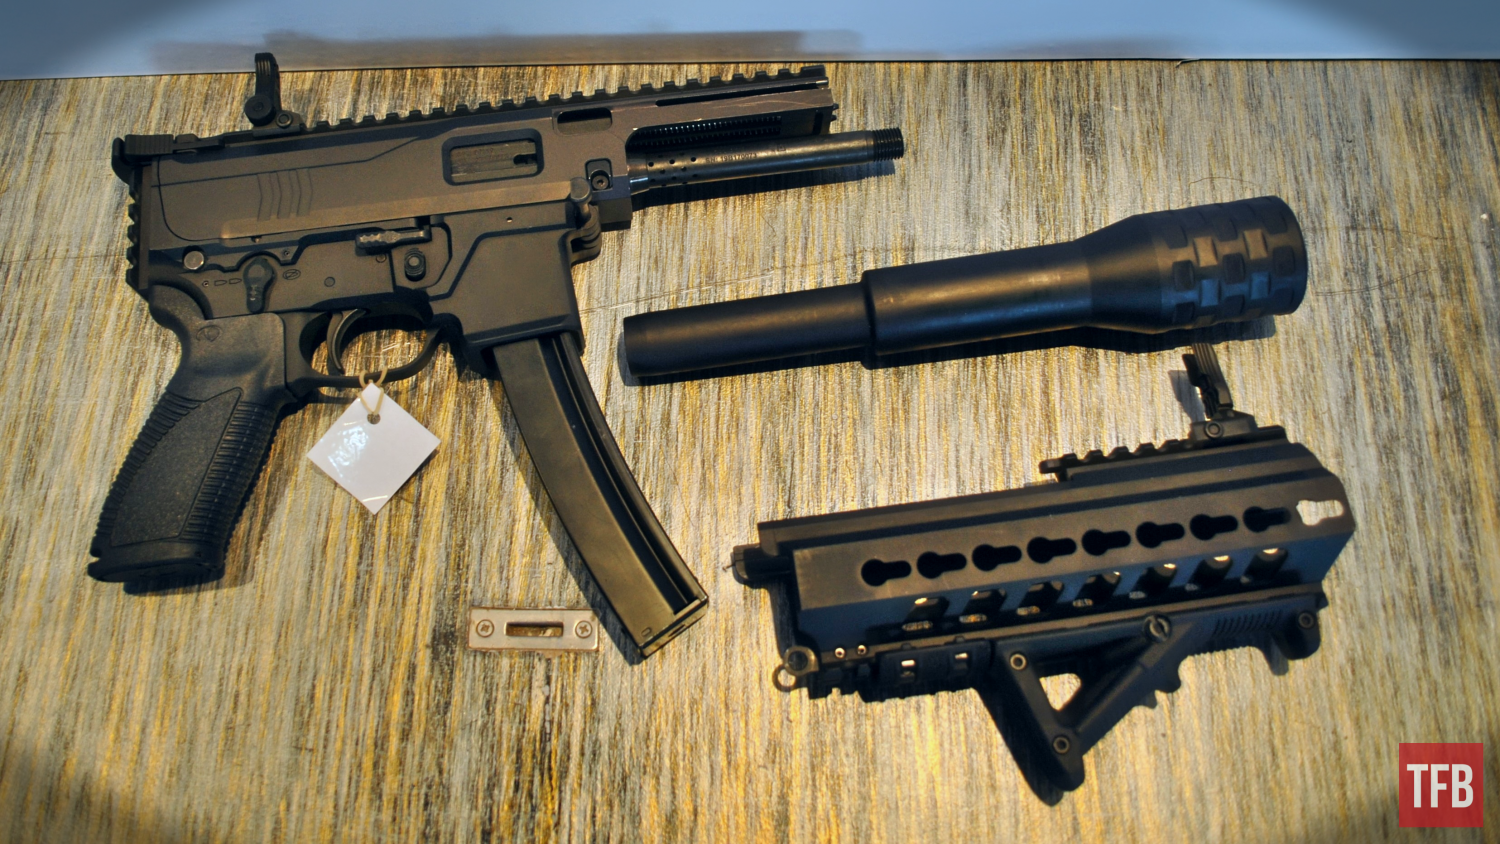 Caracal CMP9 SD disassembled